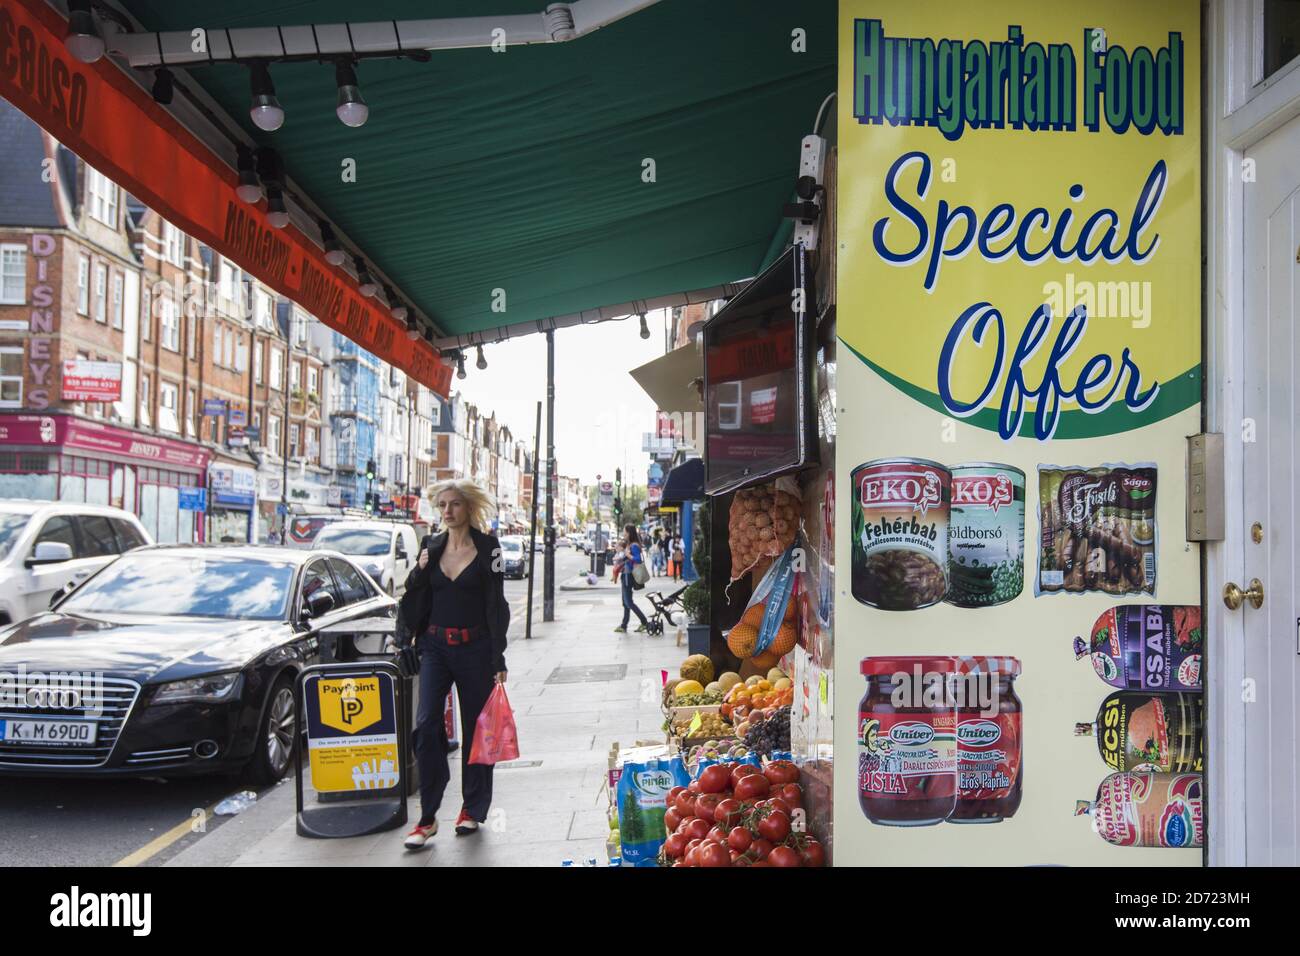 A Hungarian supermarket in Haringey, north London. September 30th will mark 100 days since the UK voted to leave the EU, during which time immigration from Eastern Europe, and reported anti-immigrant hate crimes, have both increased.  Stock Photo